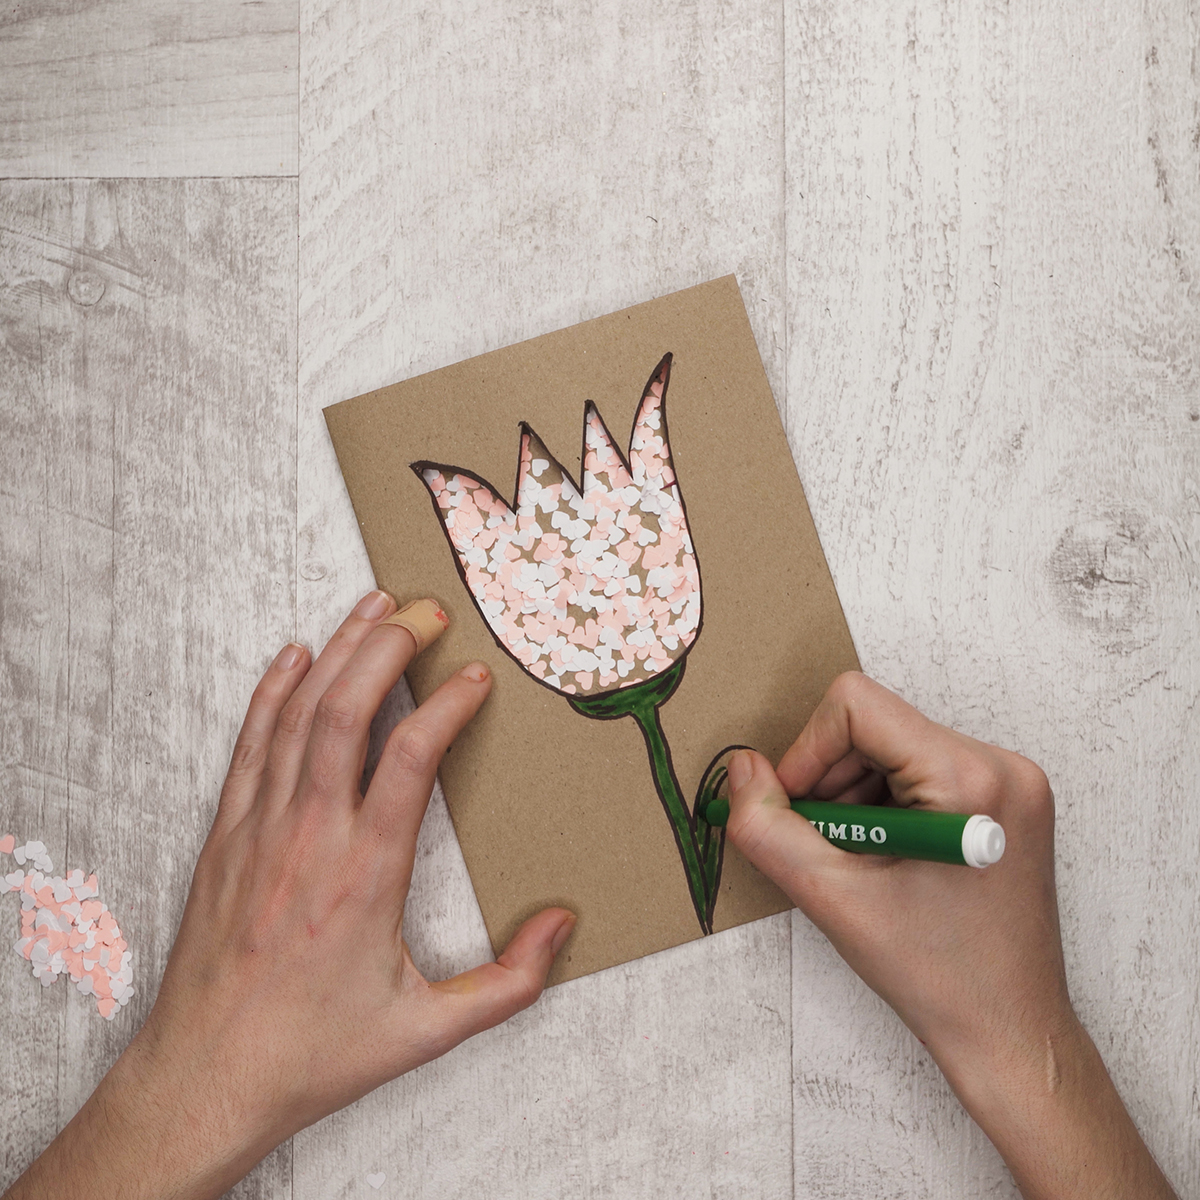 Cover the footstalks and leaves of the tulips with a green sharpie